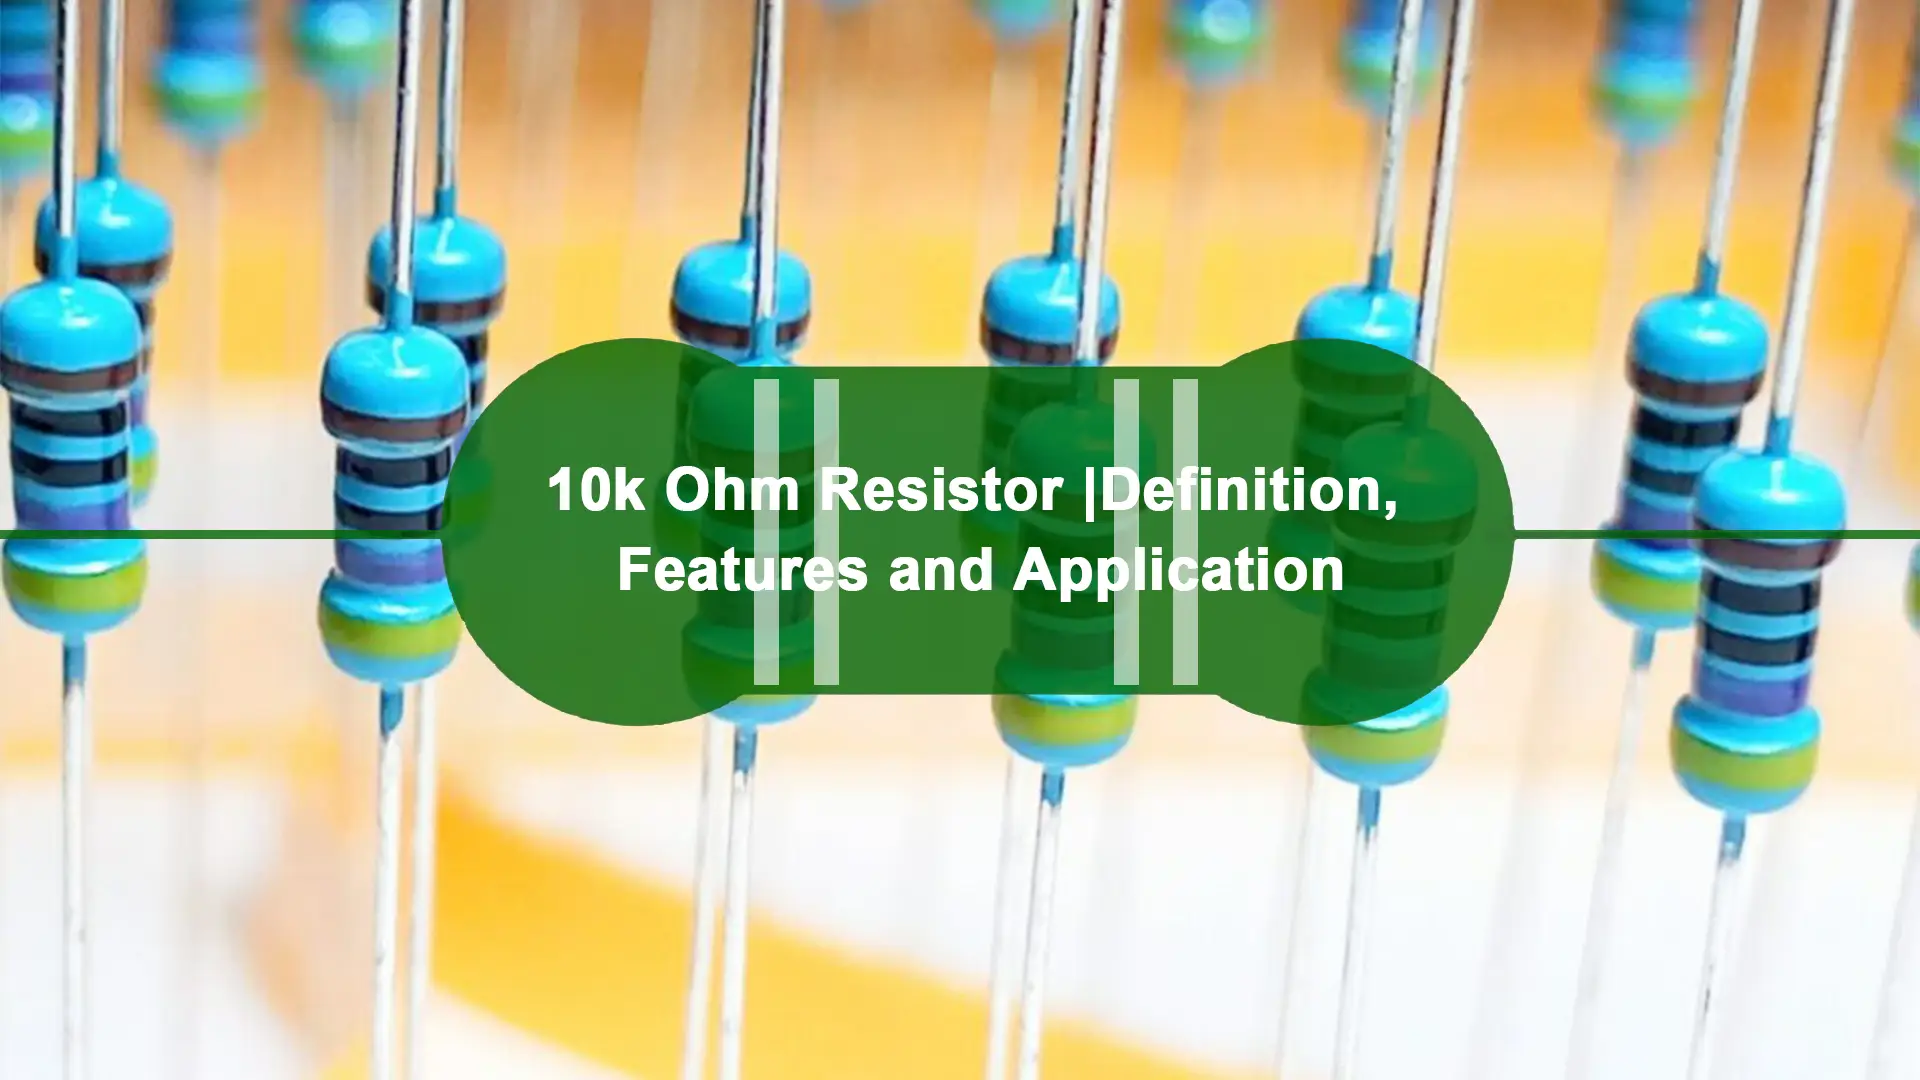 10k Ohm Resistor|Definition, Features and Application